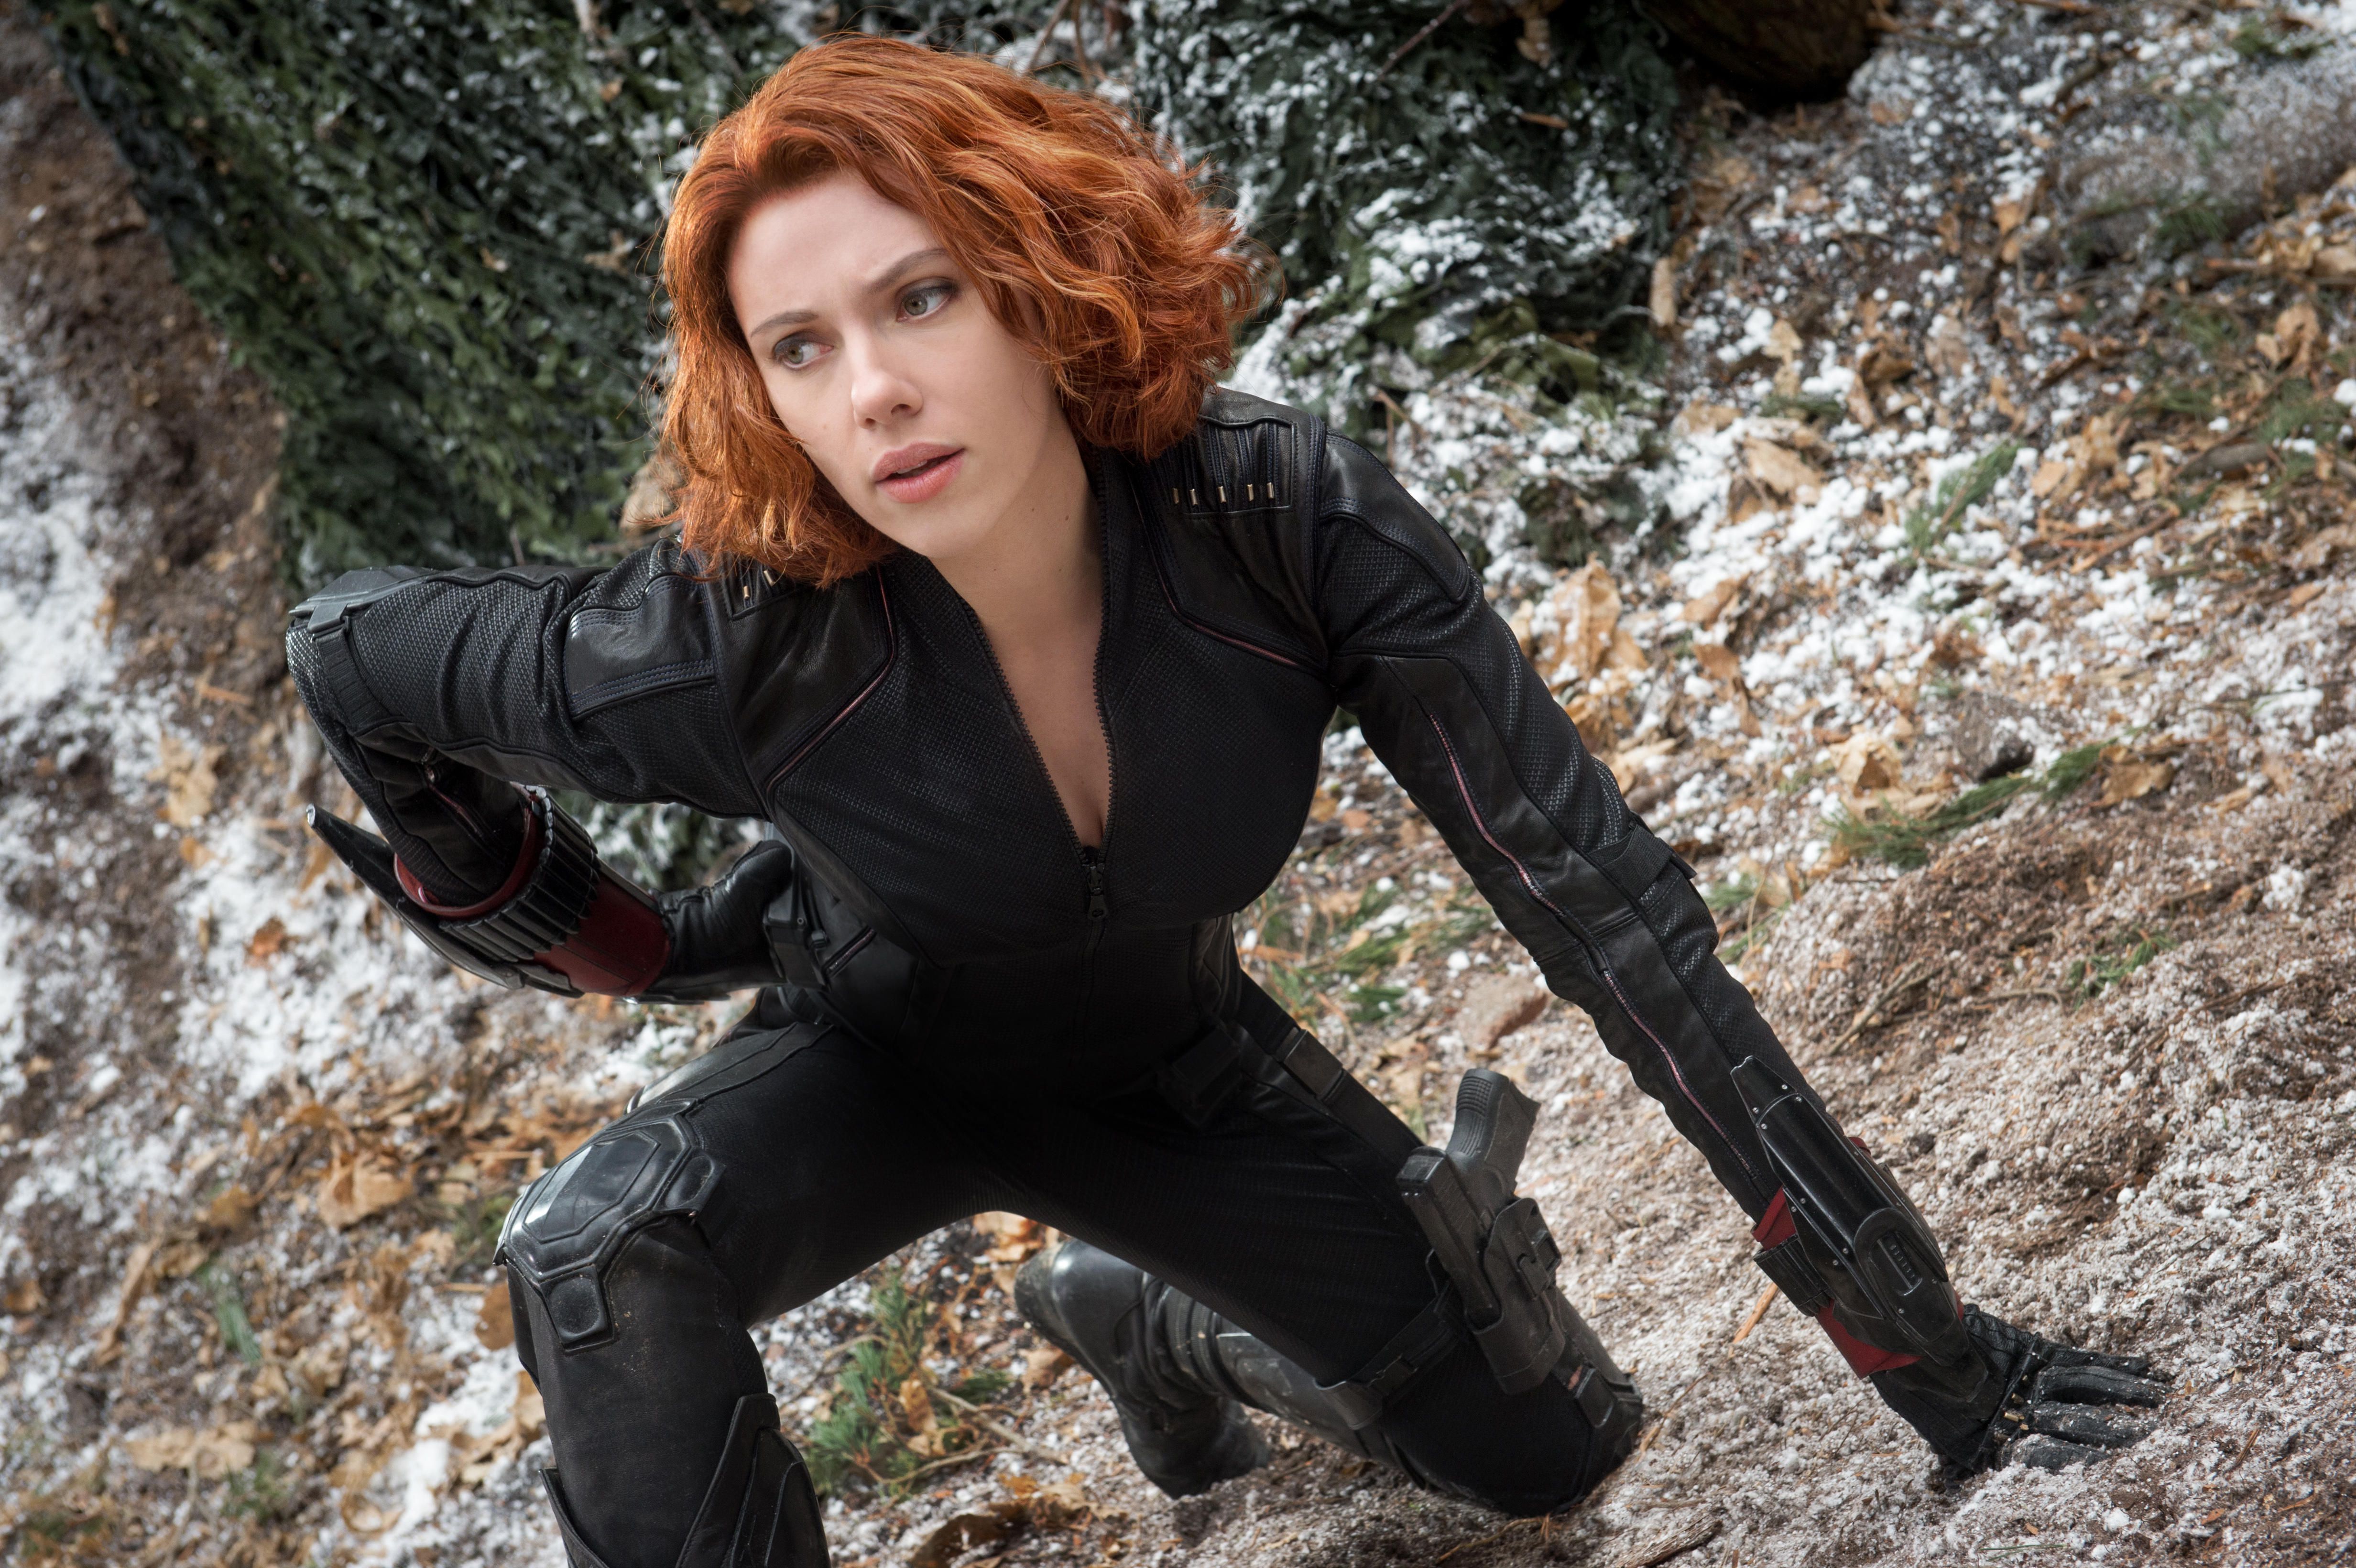 Marvel confirms Phase 4 movie release dates, including Black Widow, at Comic-Con